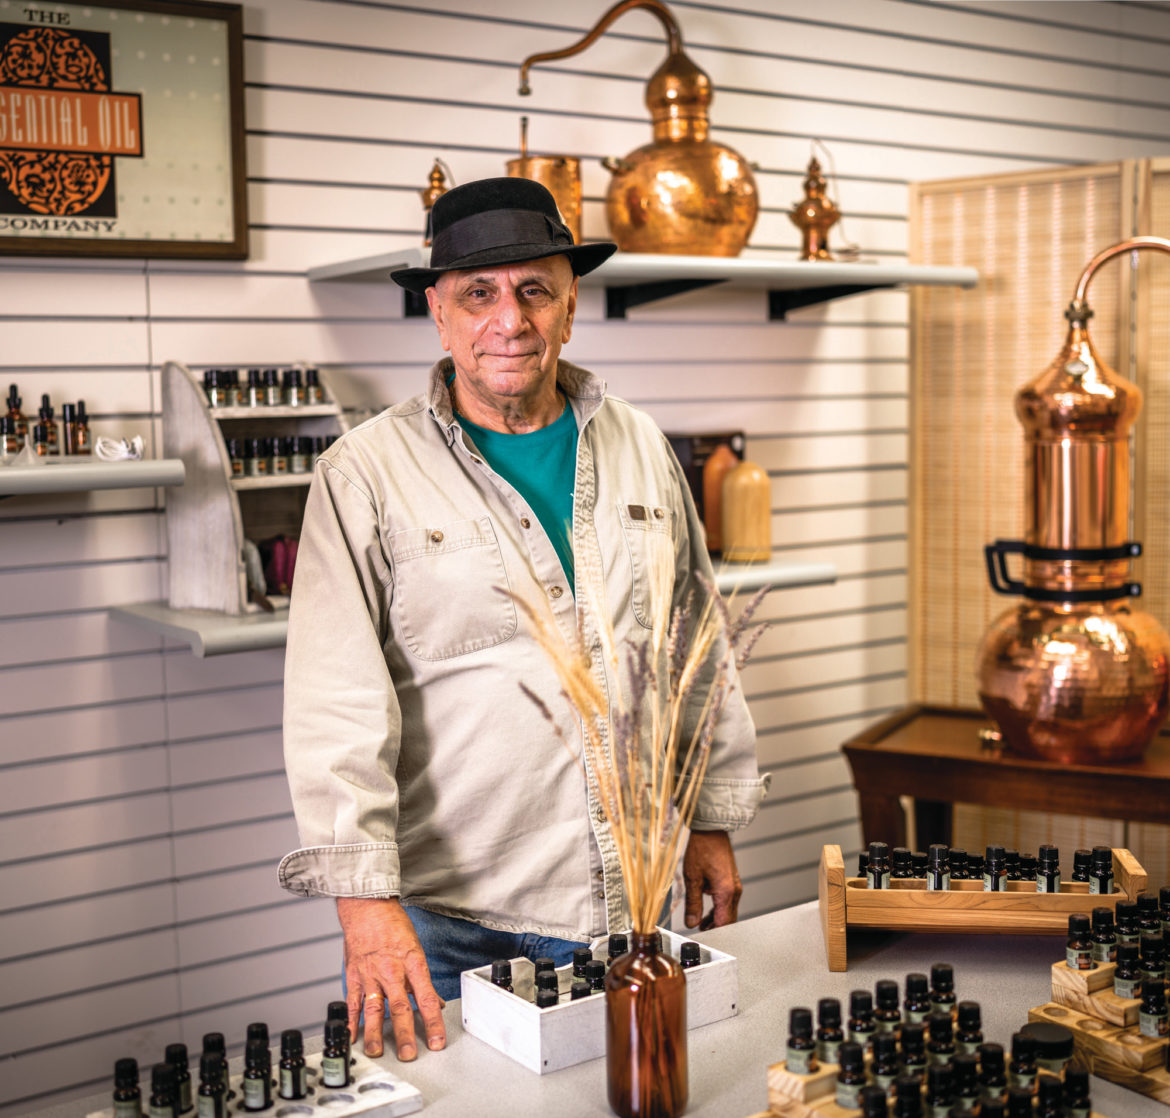 Founder Robert Seidel at The Essential Oil Company in Portland.